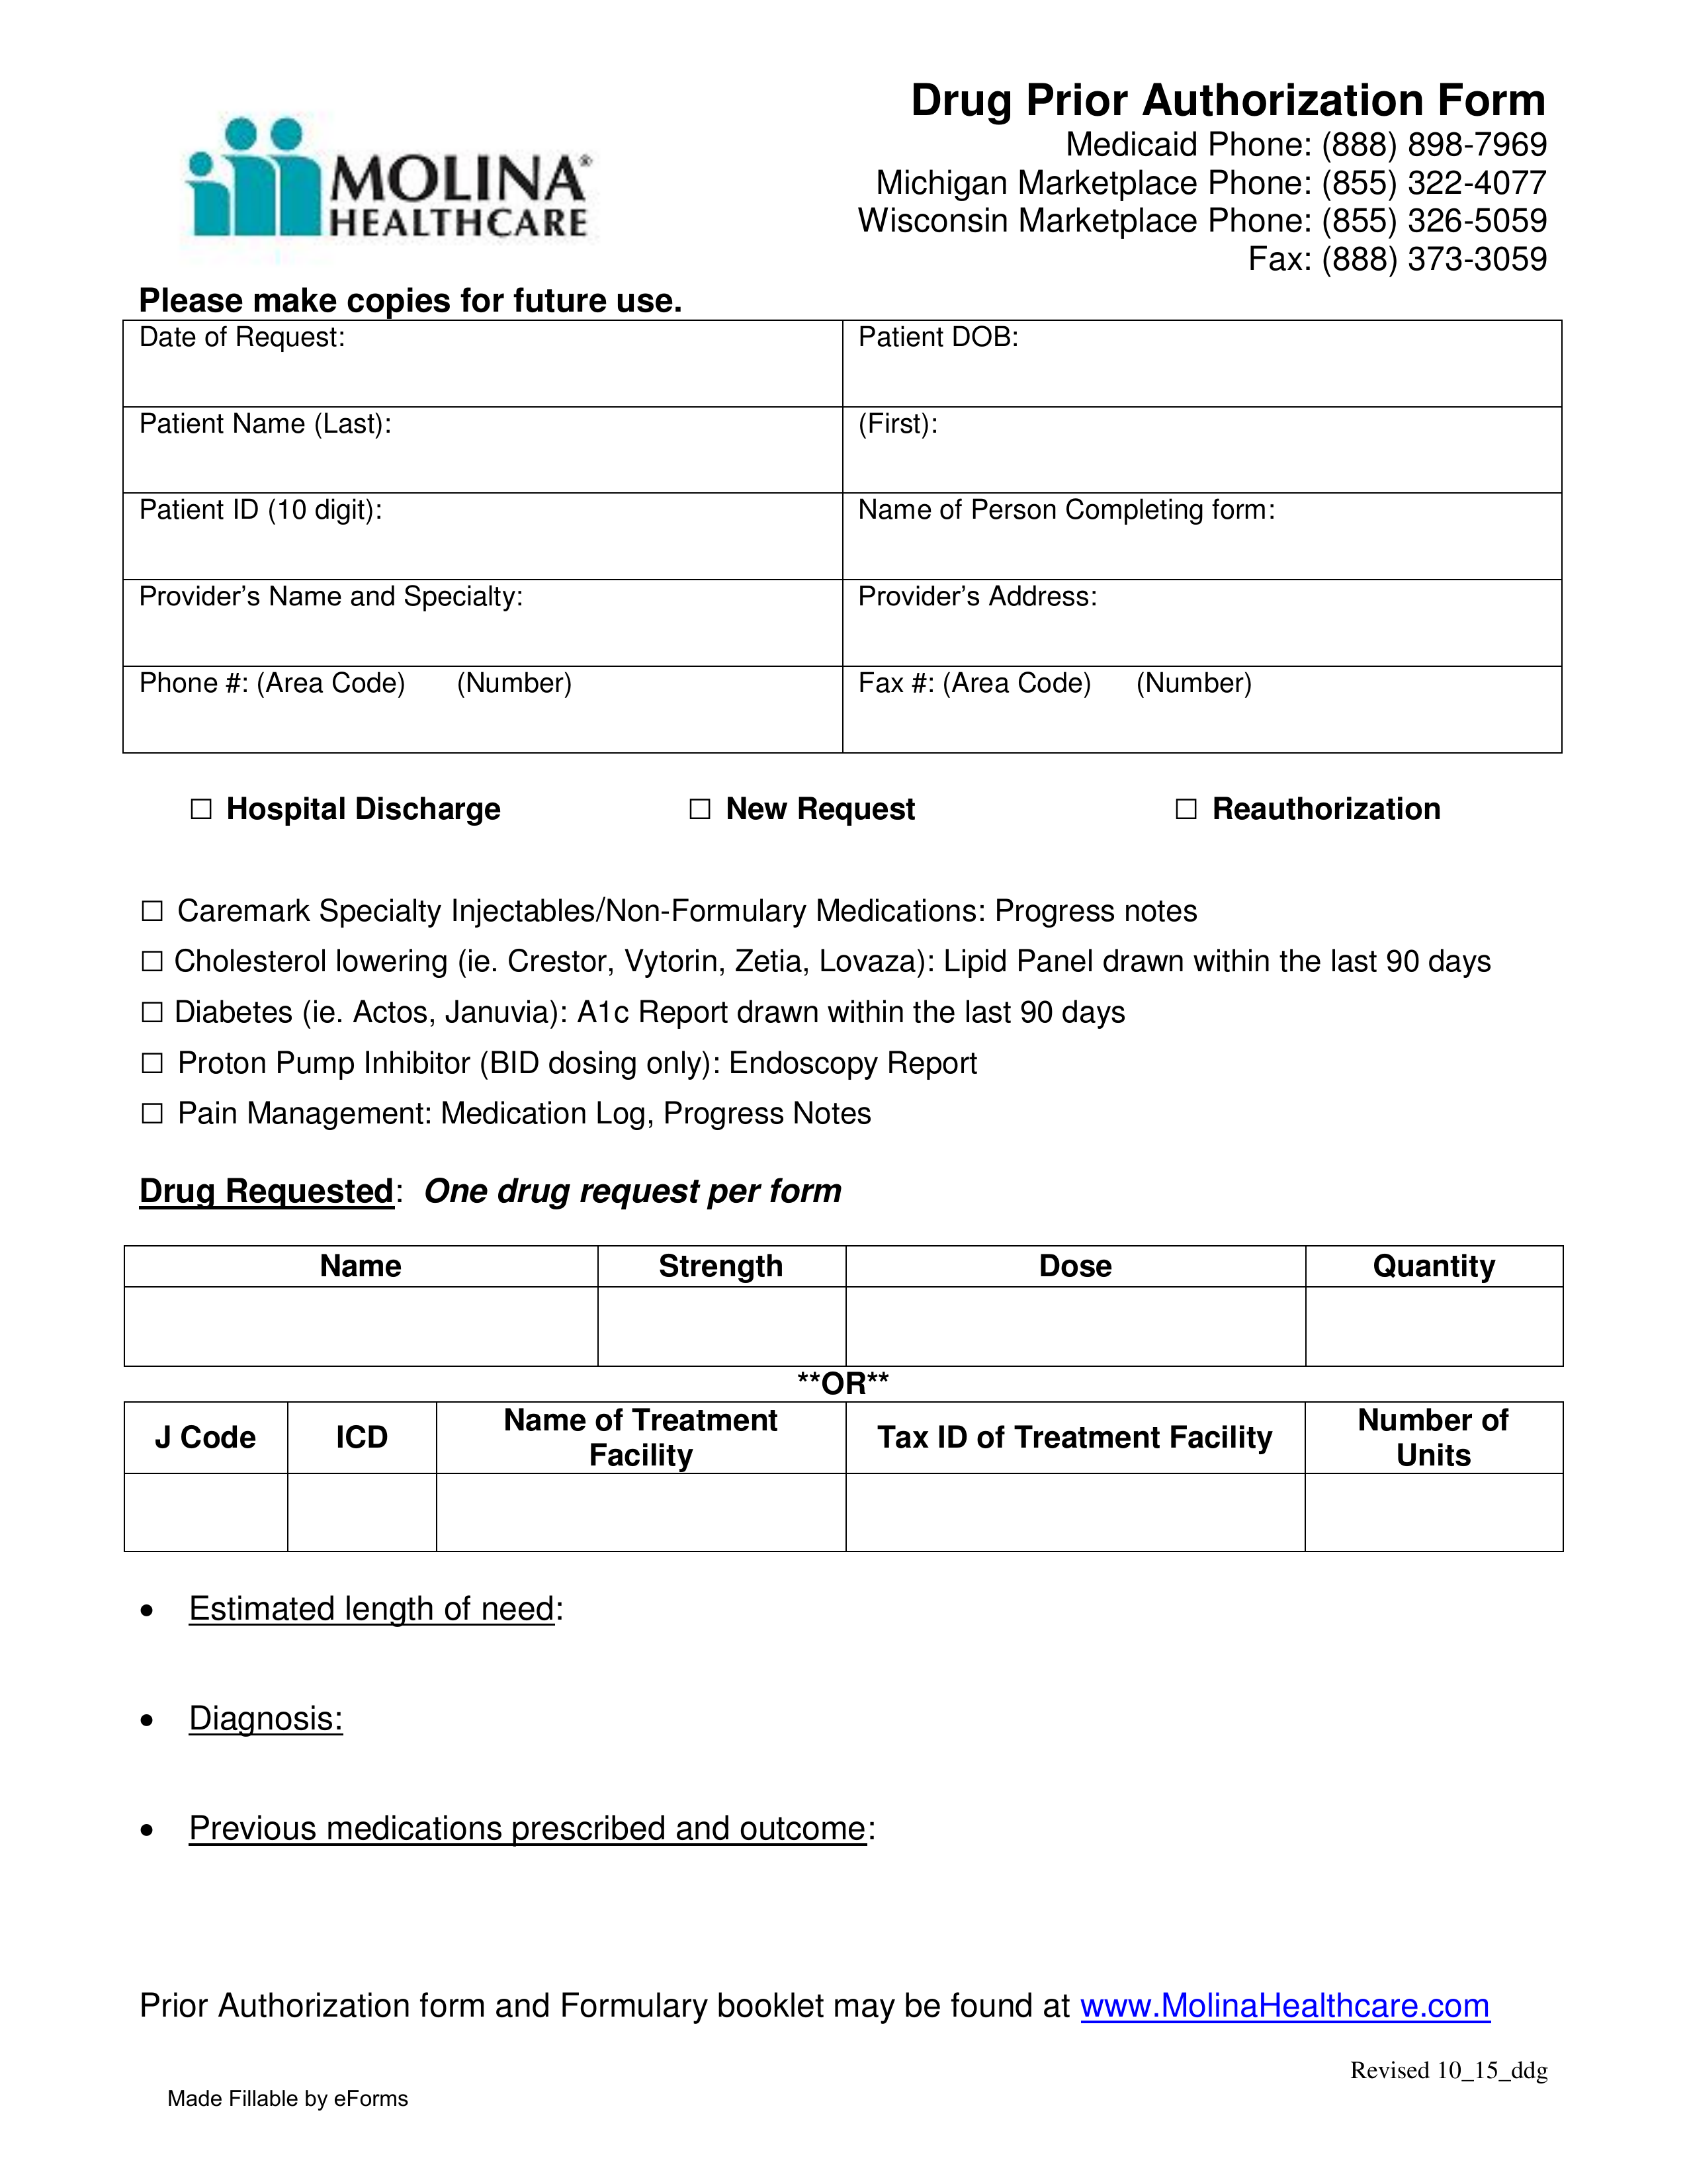 Free Molina Healthcare Prior (Rx) Authorization Form - PDF | eForms - Free Fillable Forms